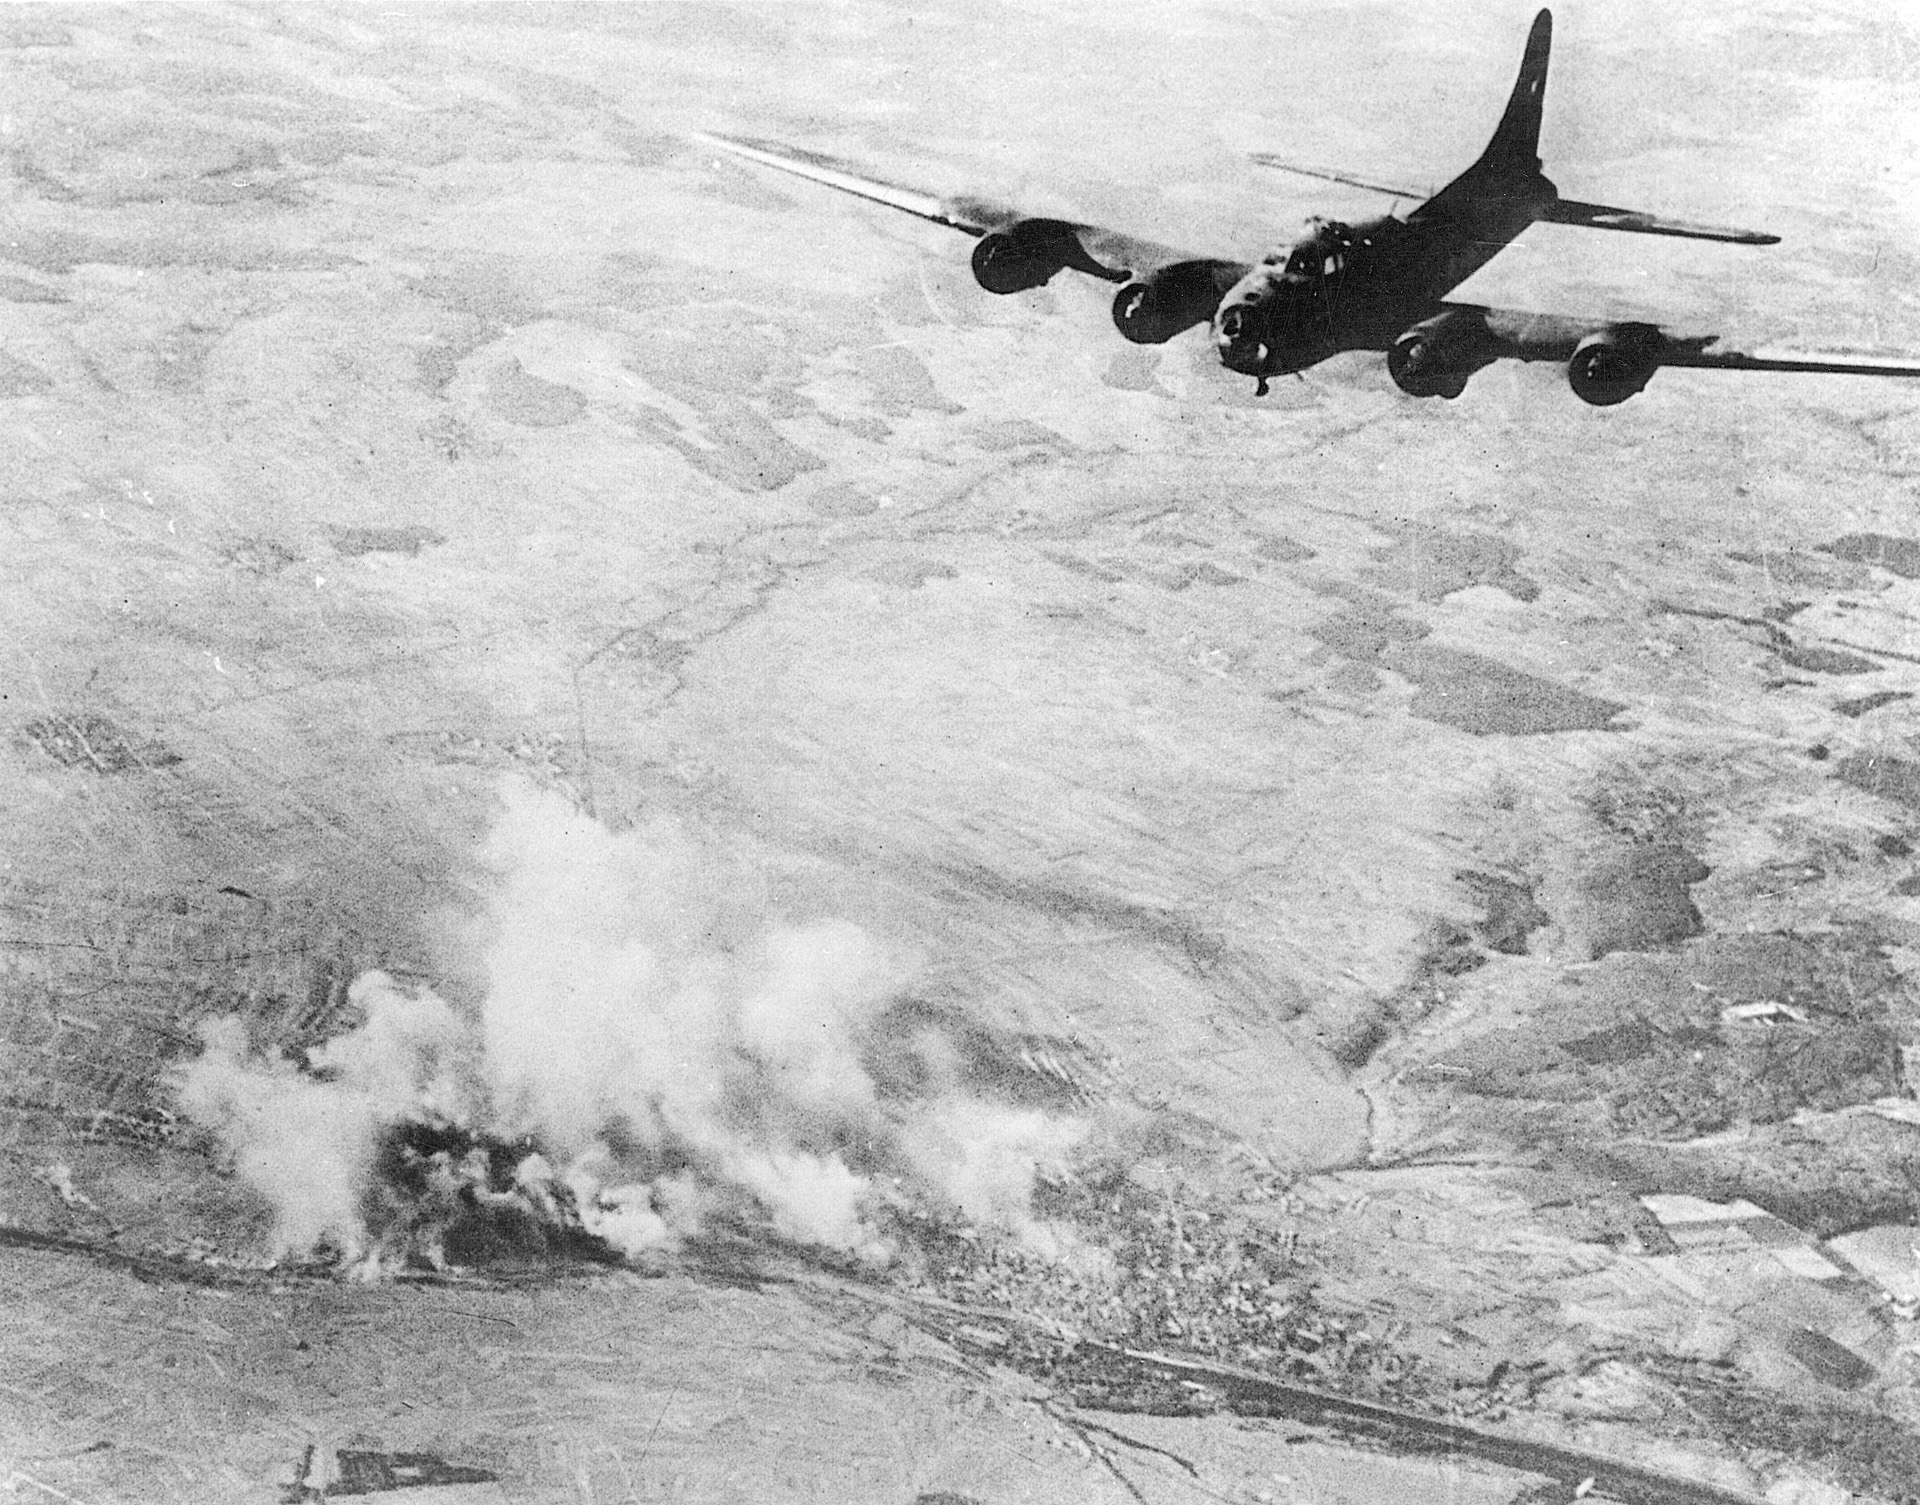 A B-17 flies high above the German city of Schweinfurt, target of costly U.S. daylight raids against ball bearing plants in the area.